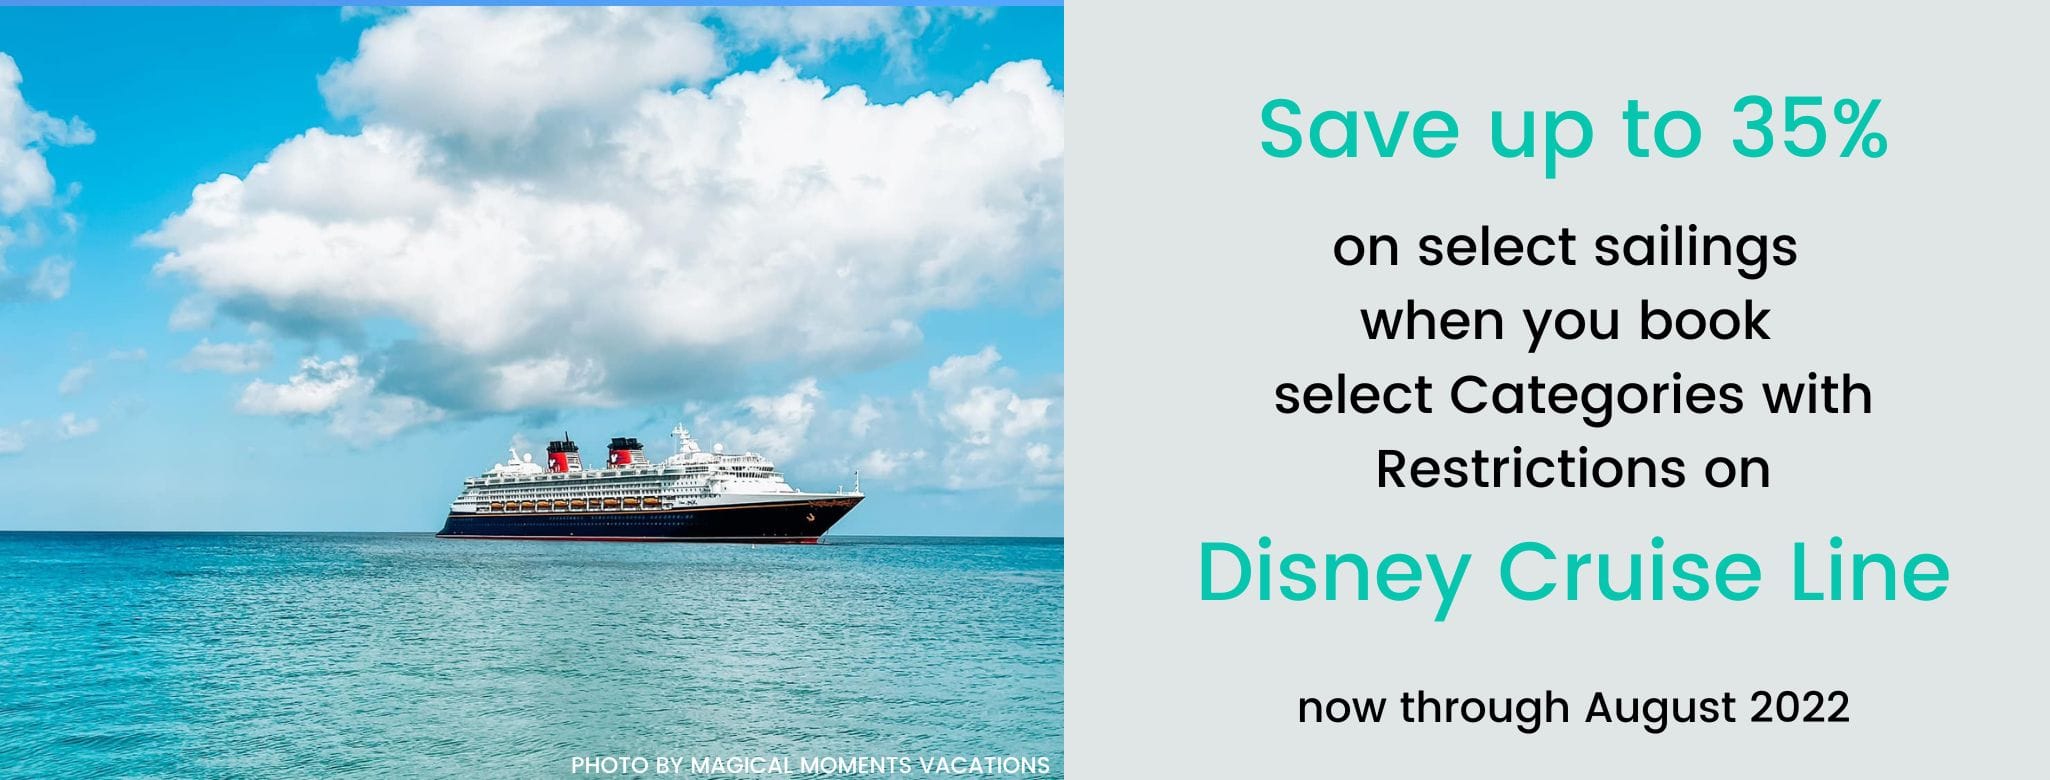 Save up to 35% on select Disney Cruise Line sailings through August 2022